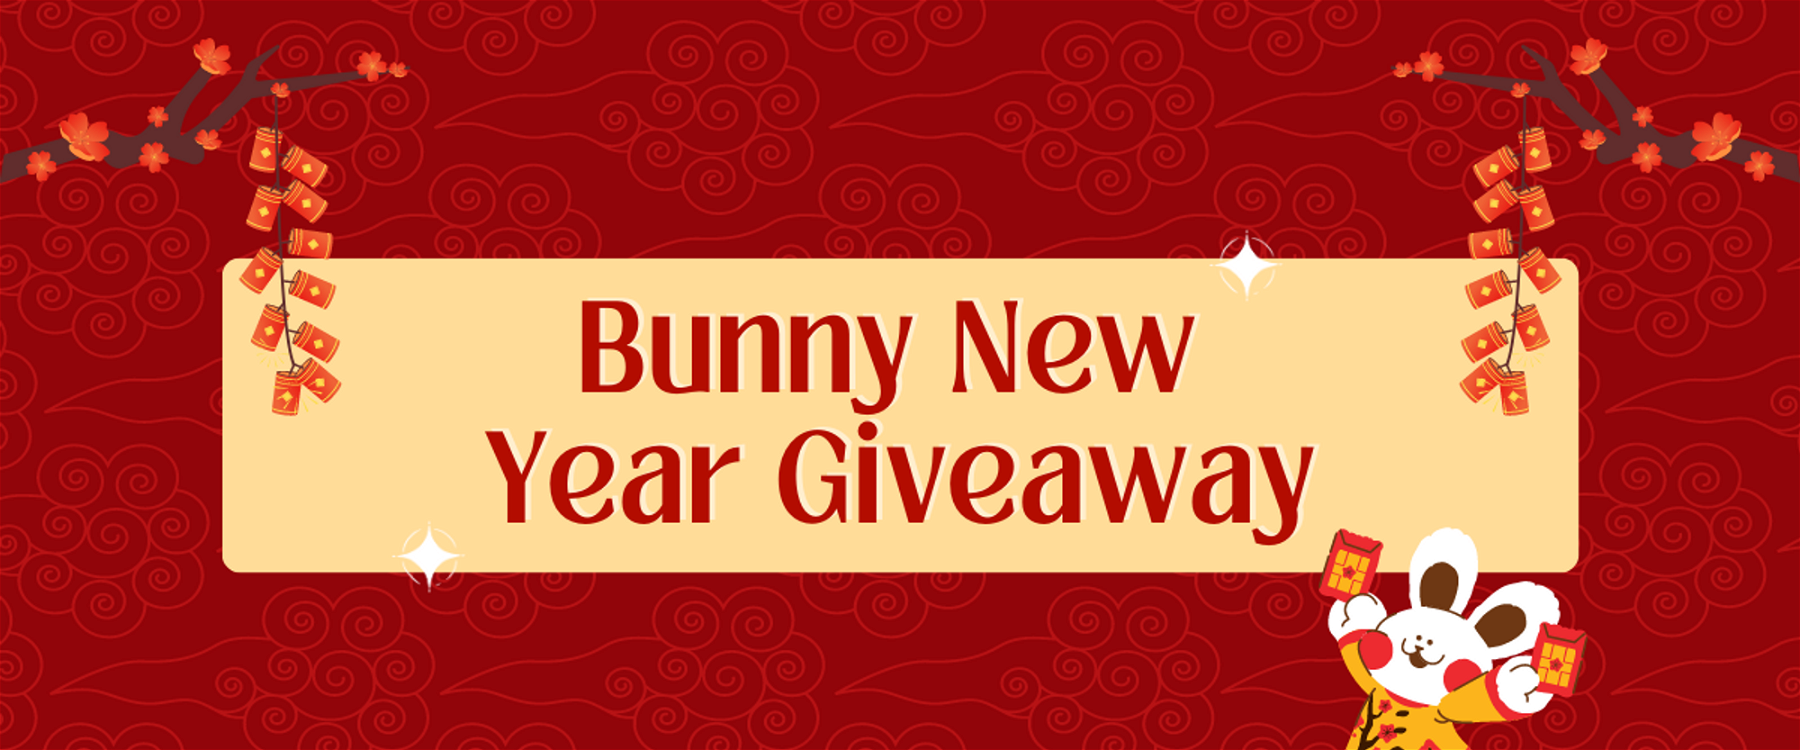 Bunny New Year Giveaway